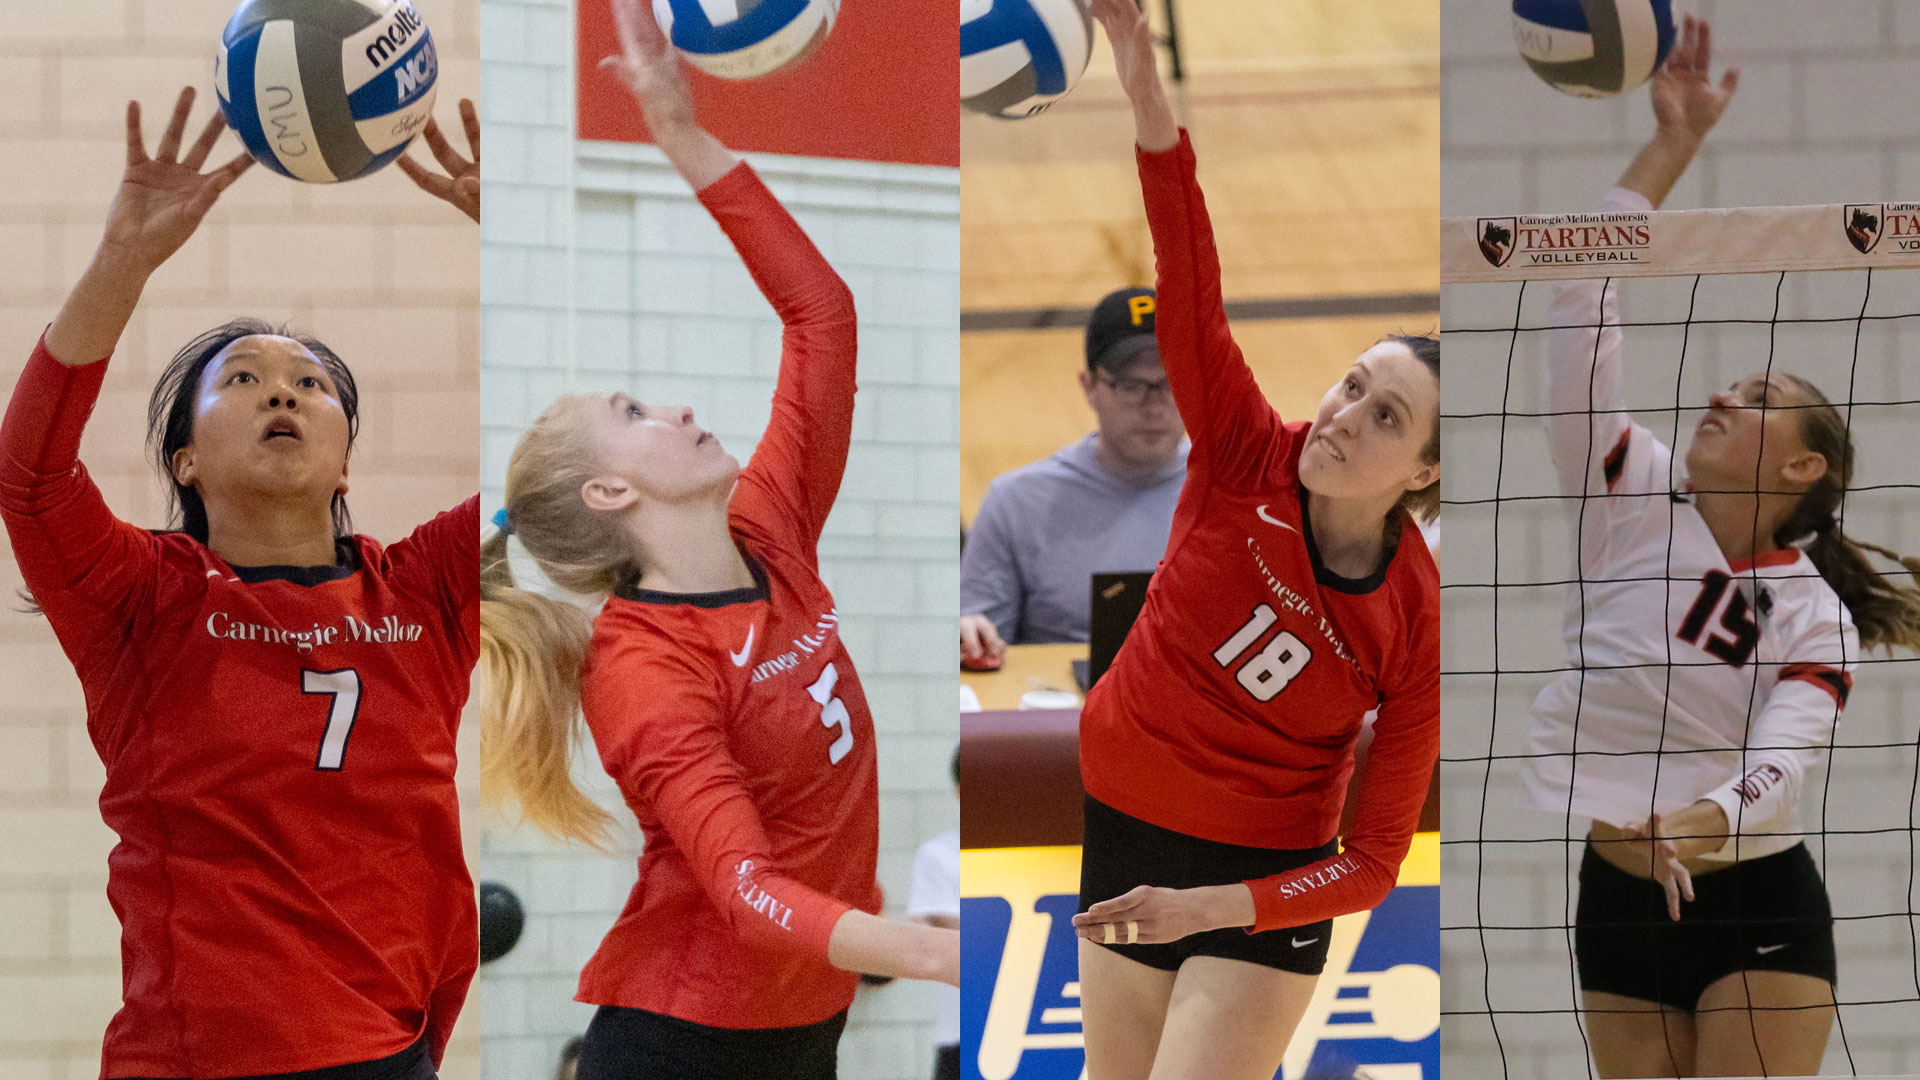 split image of four women's volleyball players setting or hitting a ball